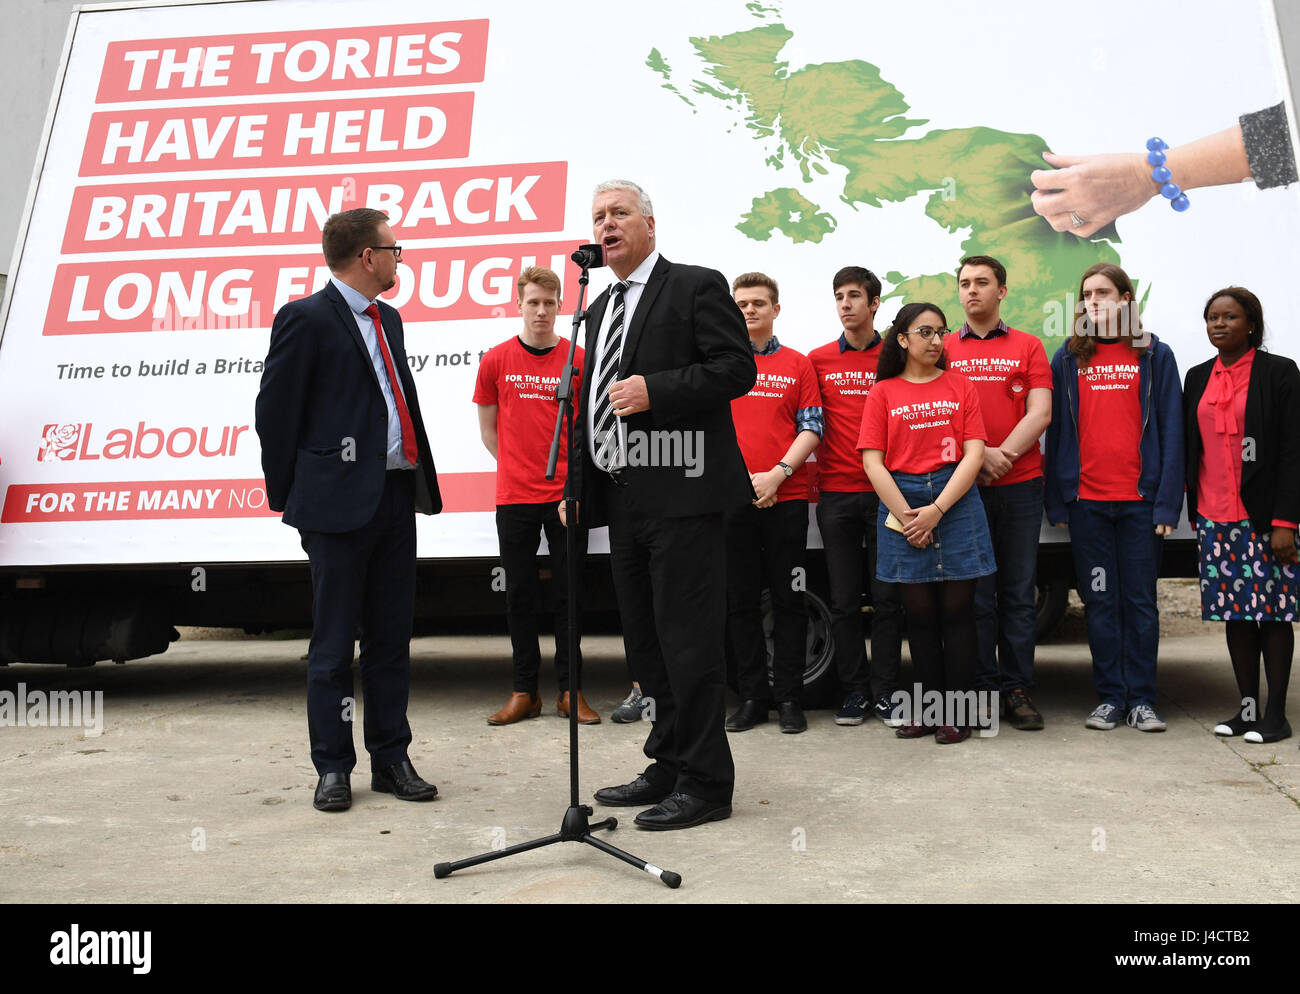 National Elections and Campaign Coordinators Ian Lavery (speaking) and Andrew Gwynne reveal a new poster for Labour's General Election campaign in London. Stock Photo